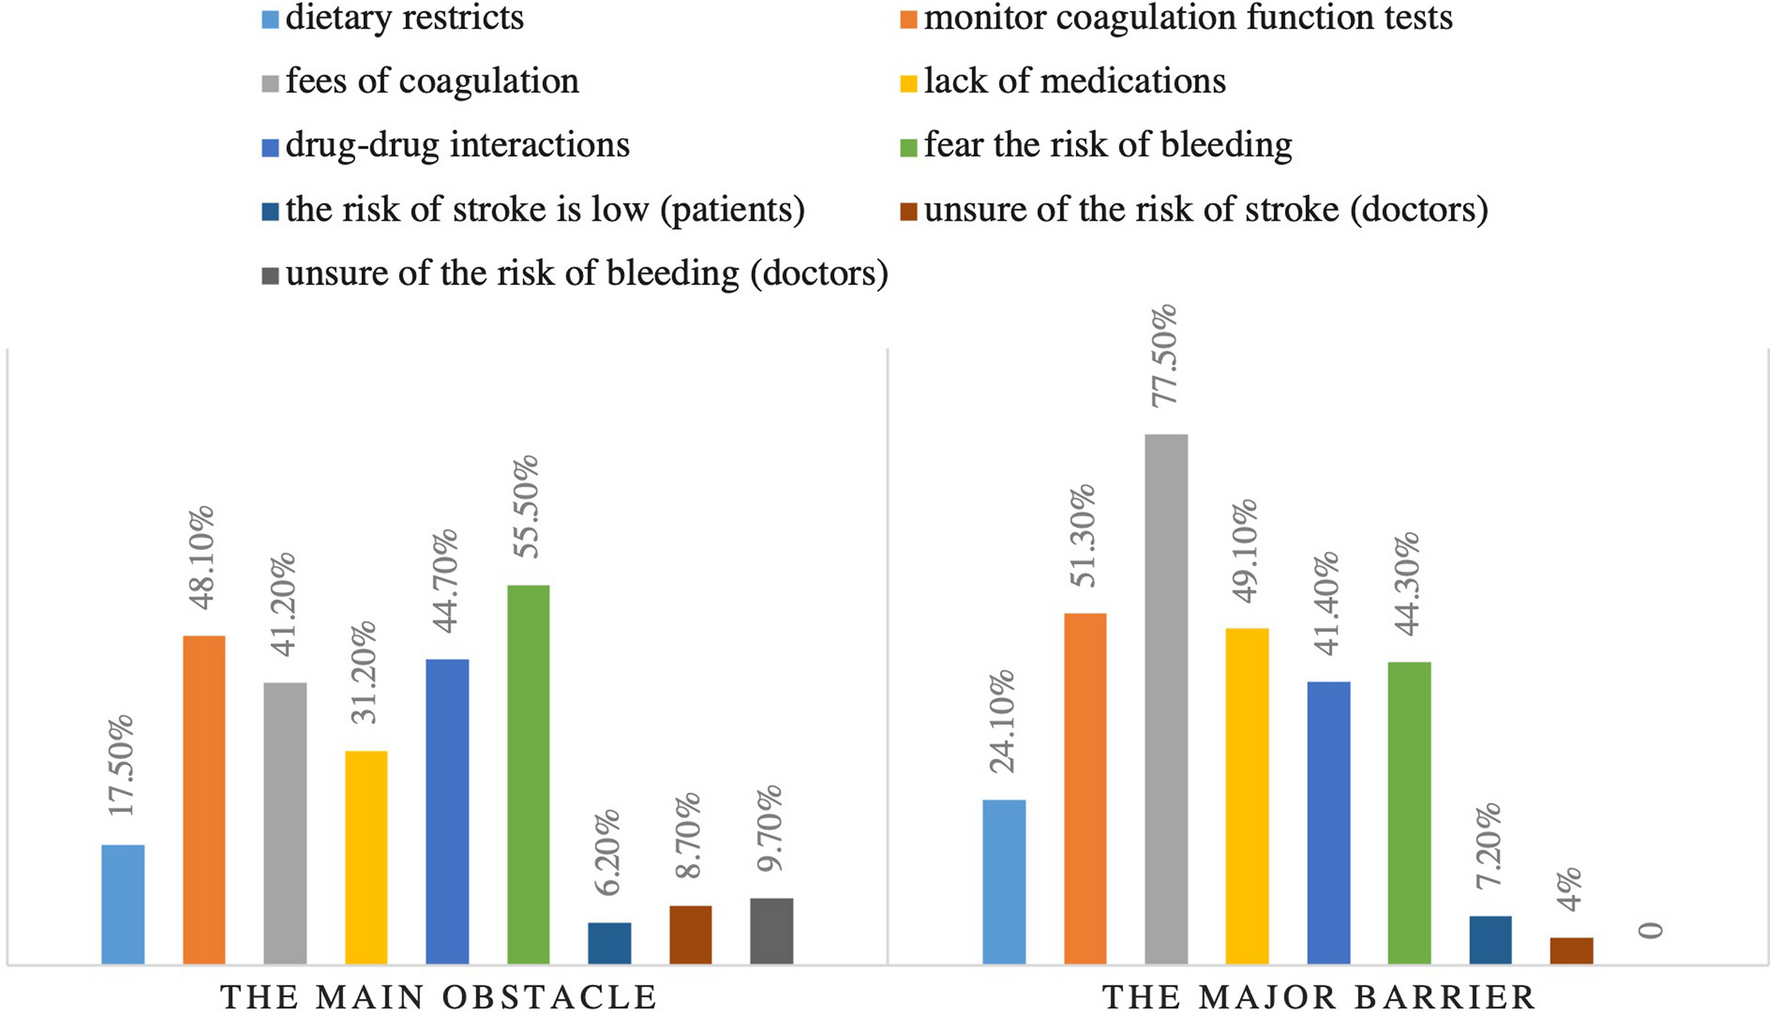 Assessing physicians’ knowledge, attitude, and practice on anticoagulant therapy in non-valvular atrial fibrillation: Syrian insights